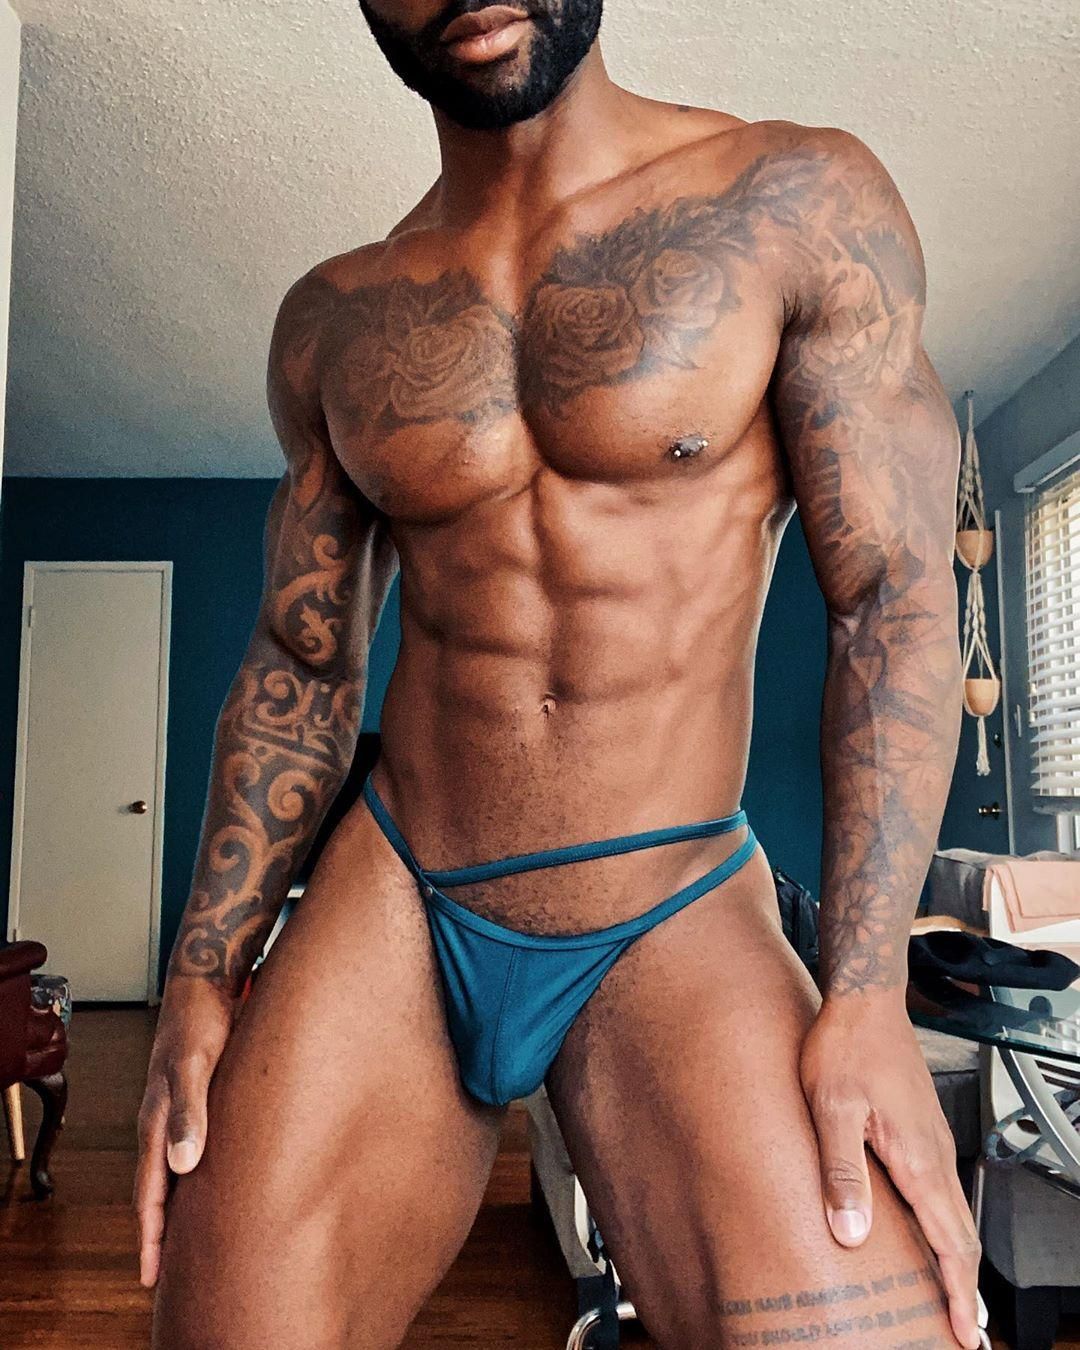 Kevin Carnell in small underwear.